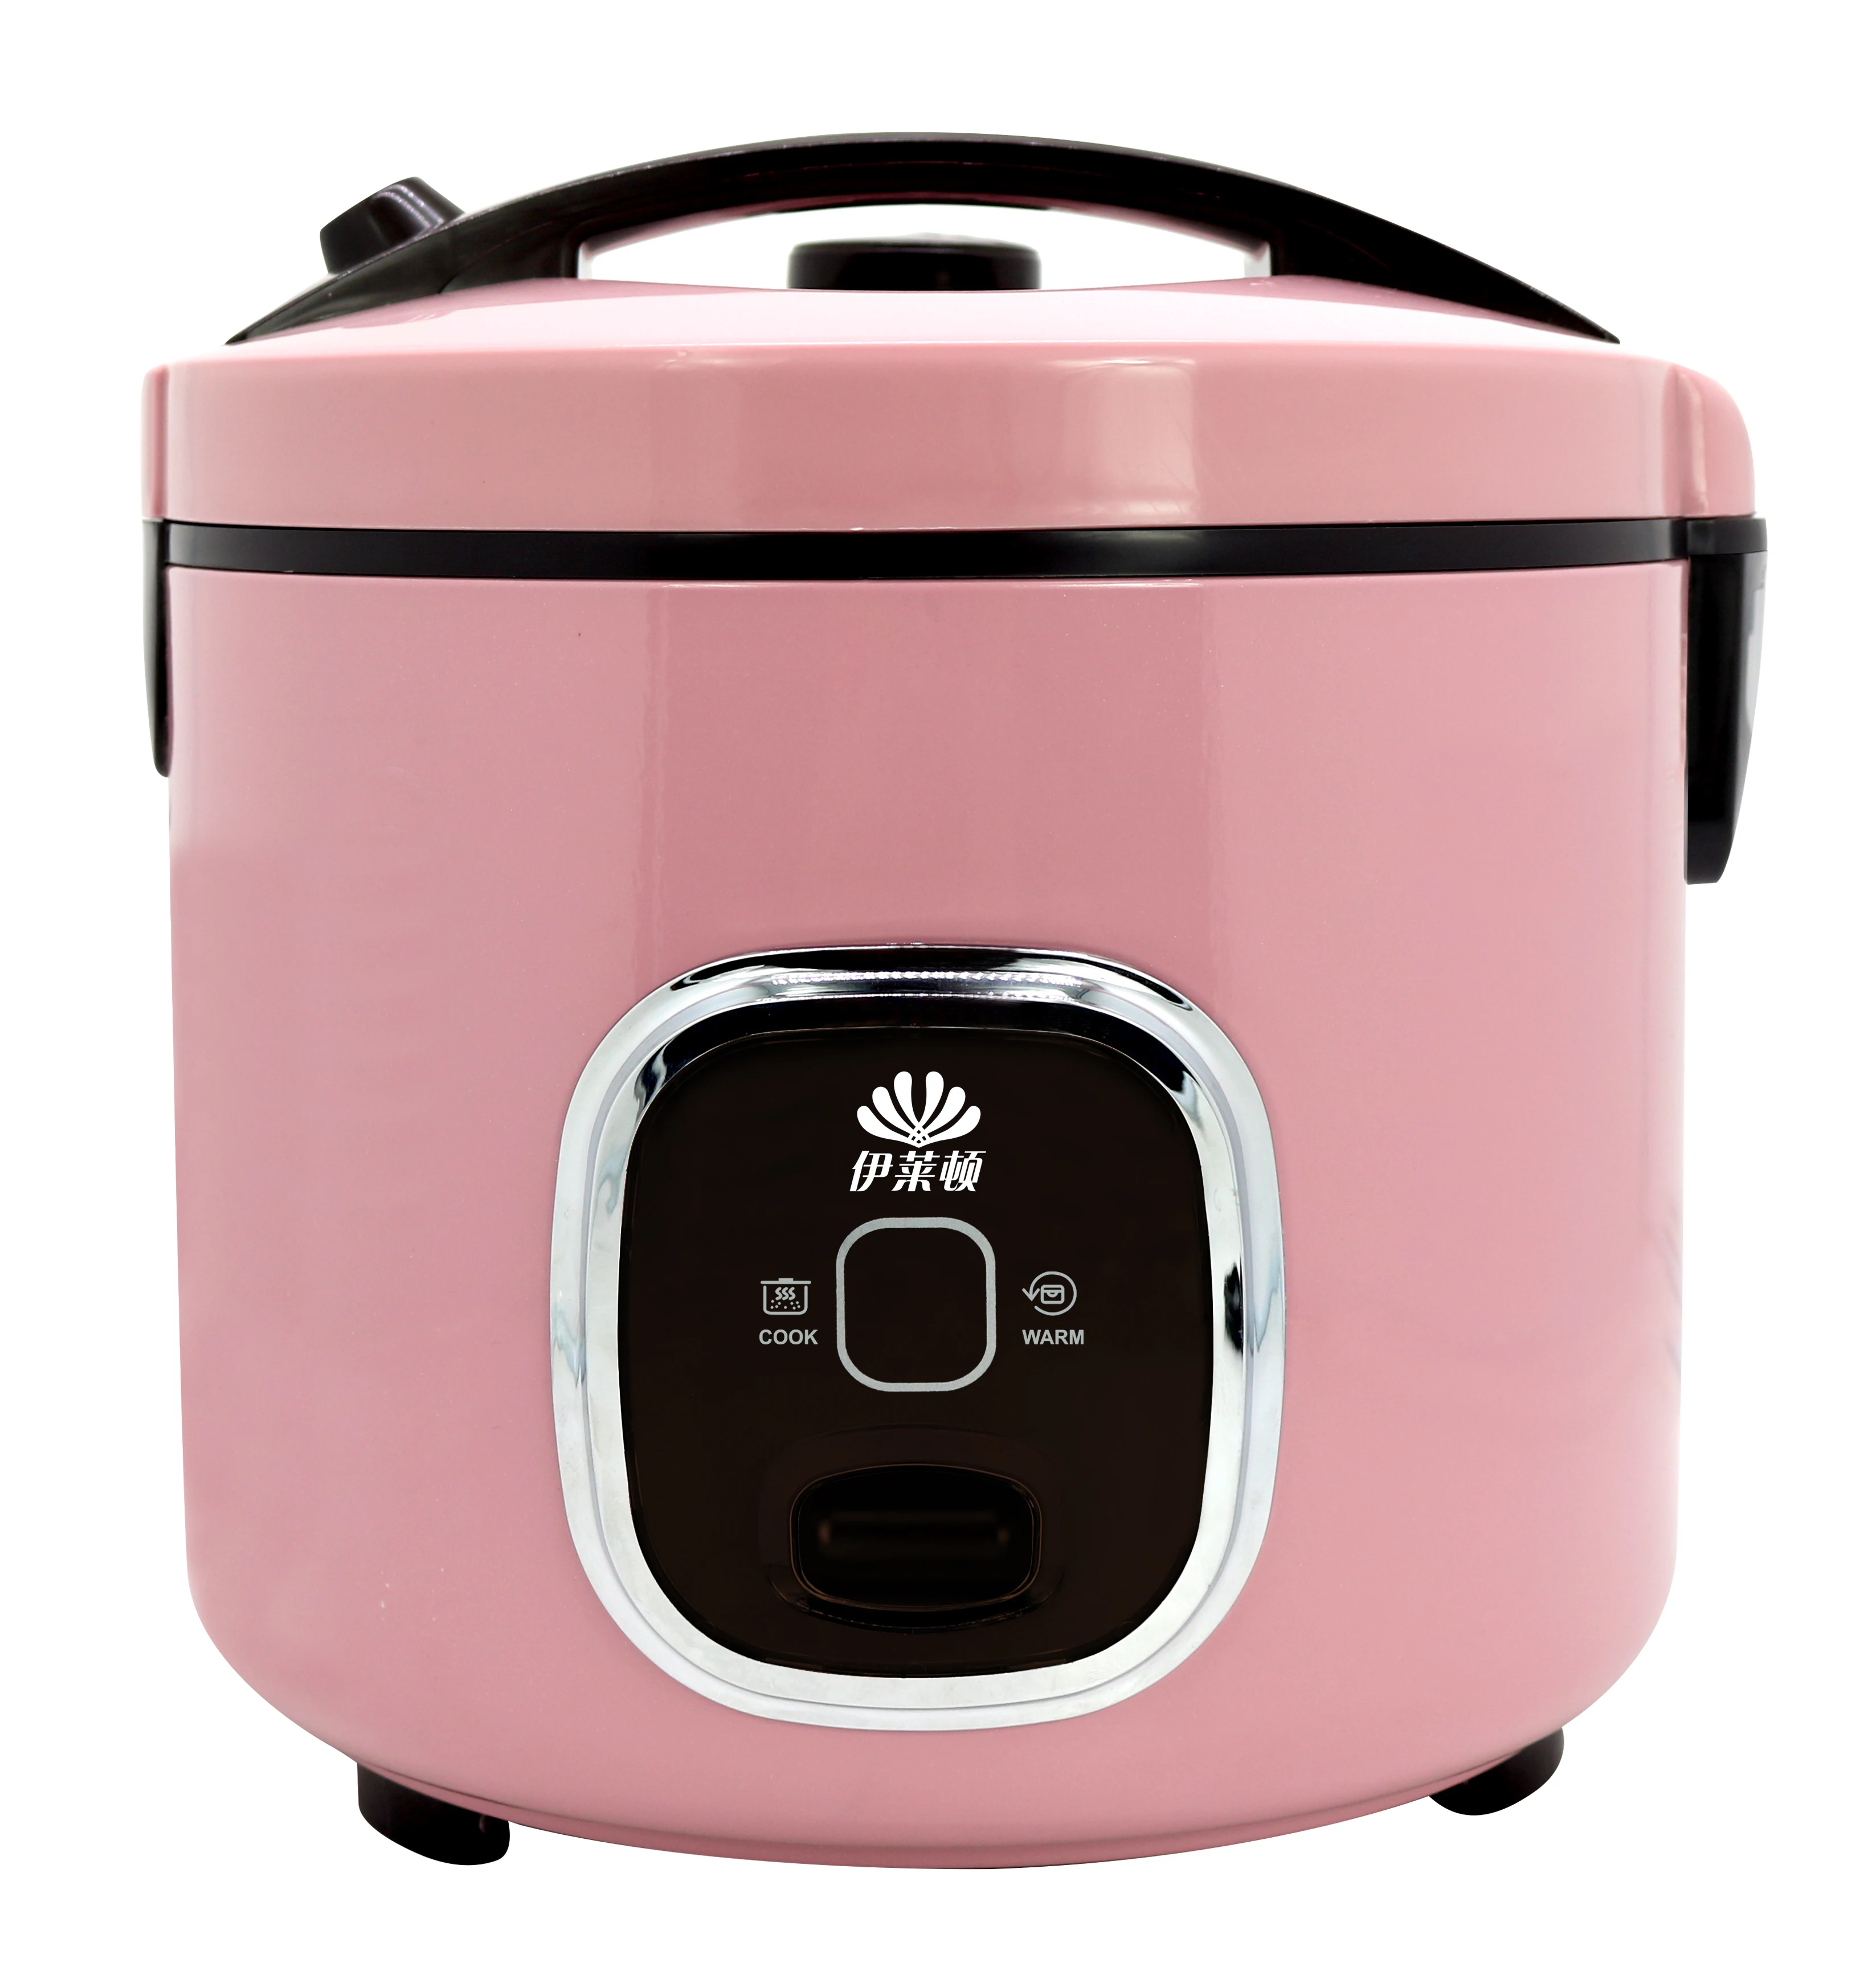 Vietnam New Arrival Cylinder Models Full Body Housing Thickness Aluminum Pot Deluxe Pink Color Rice Cooker